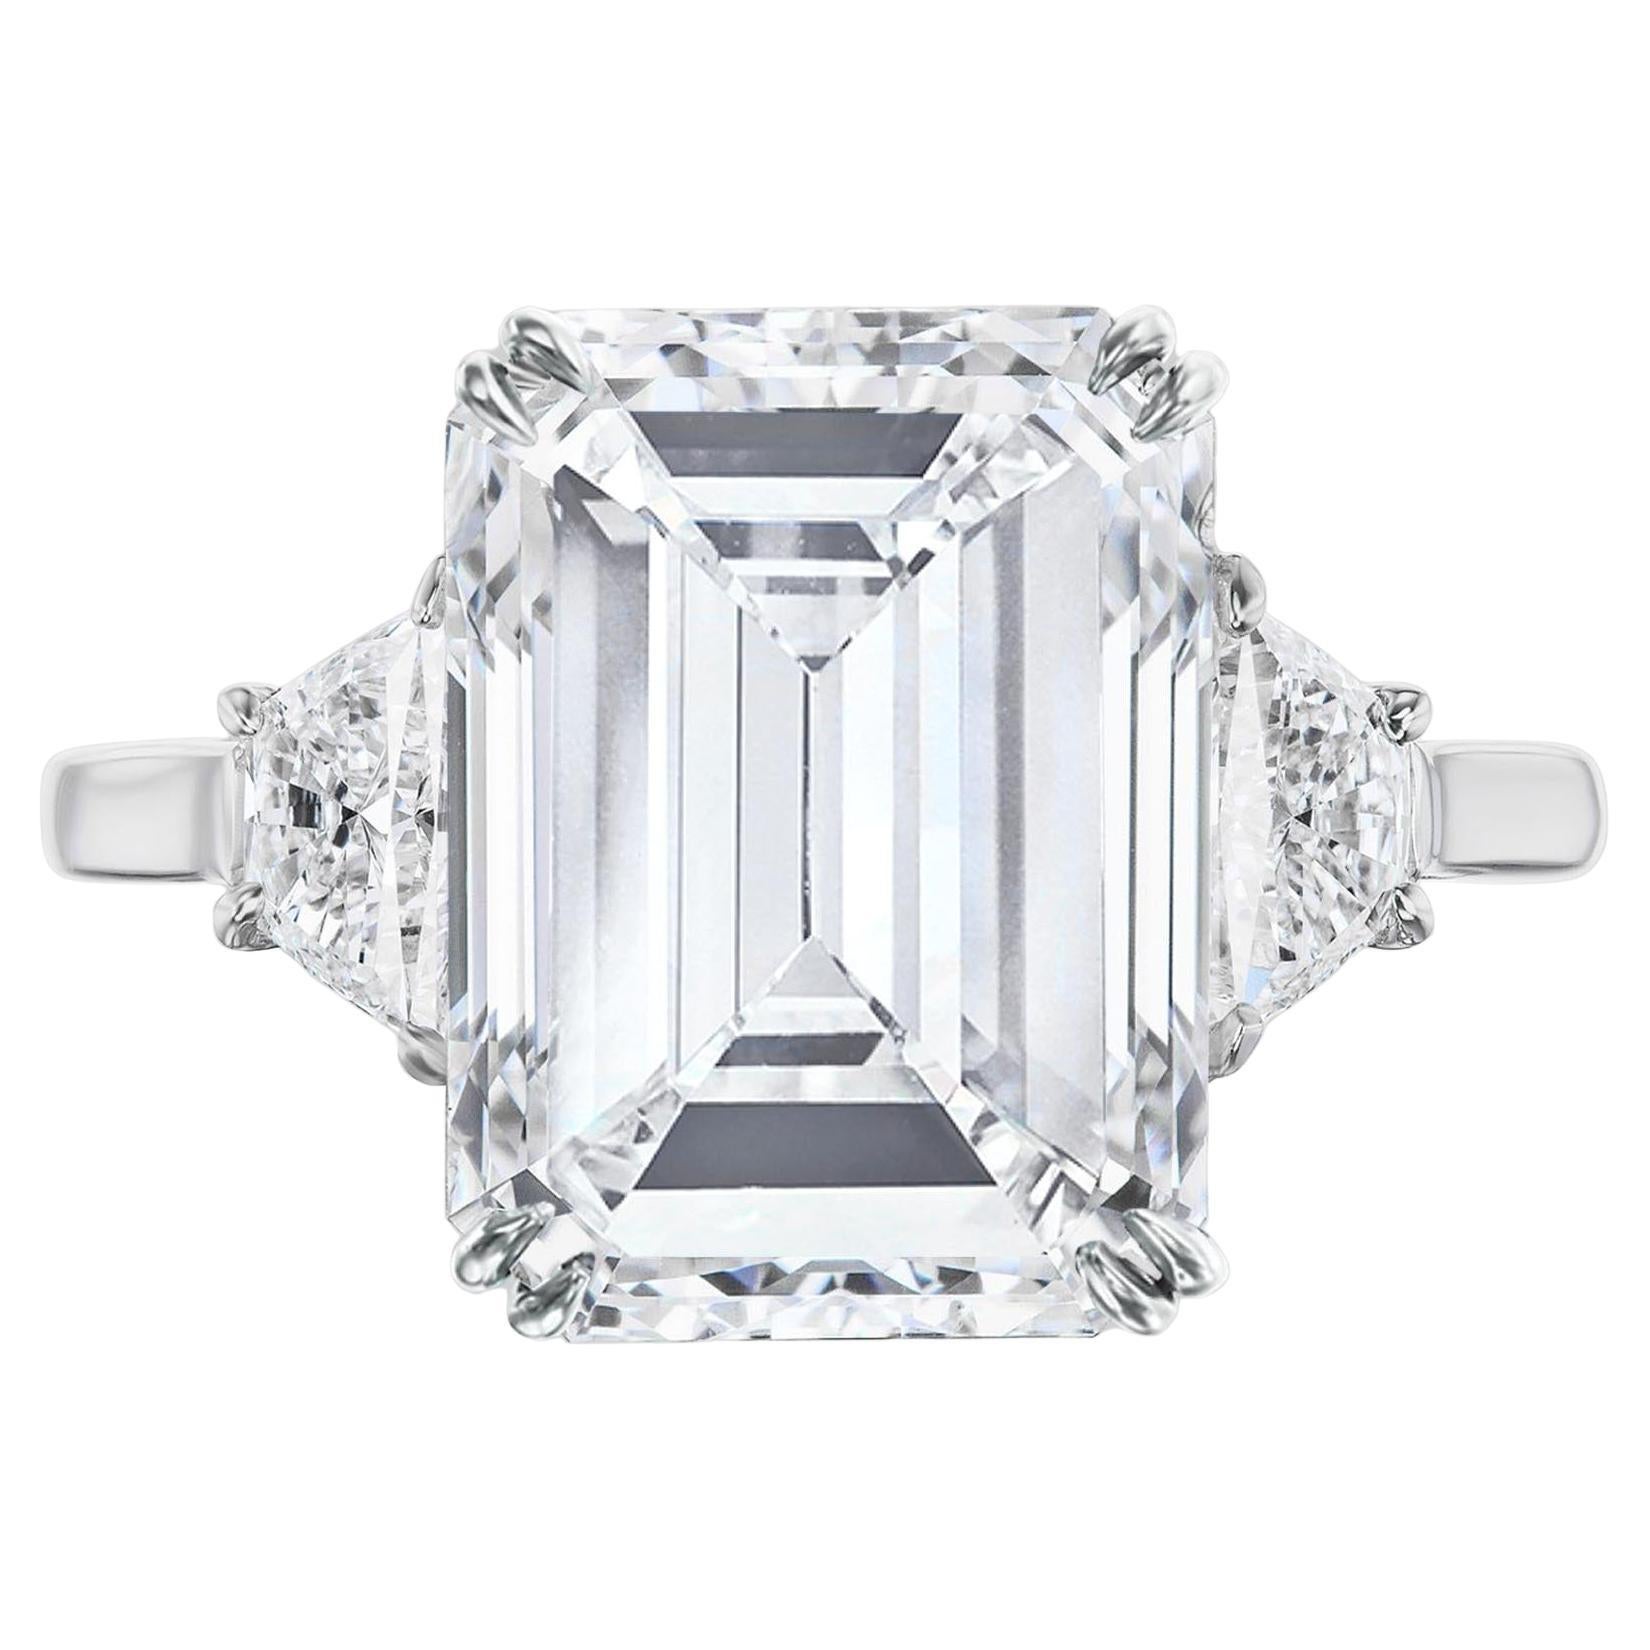 Flawless GIA Certified 6 Carat Emerald Cut Diamond Ring Ideal Proportions